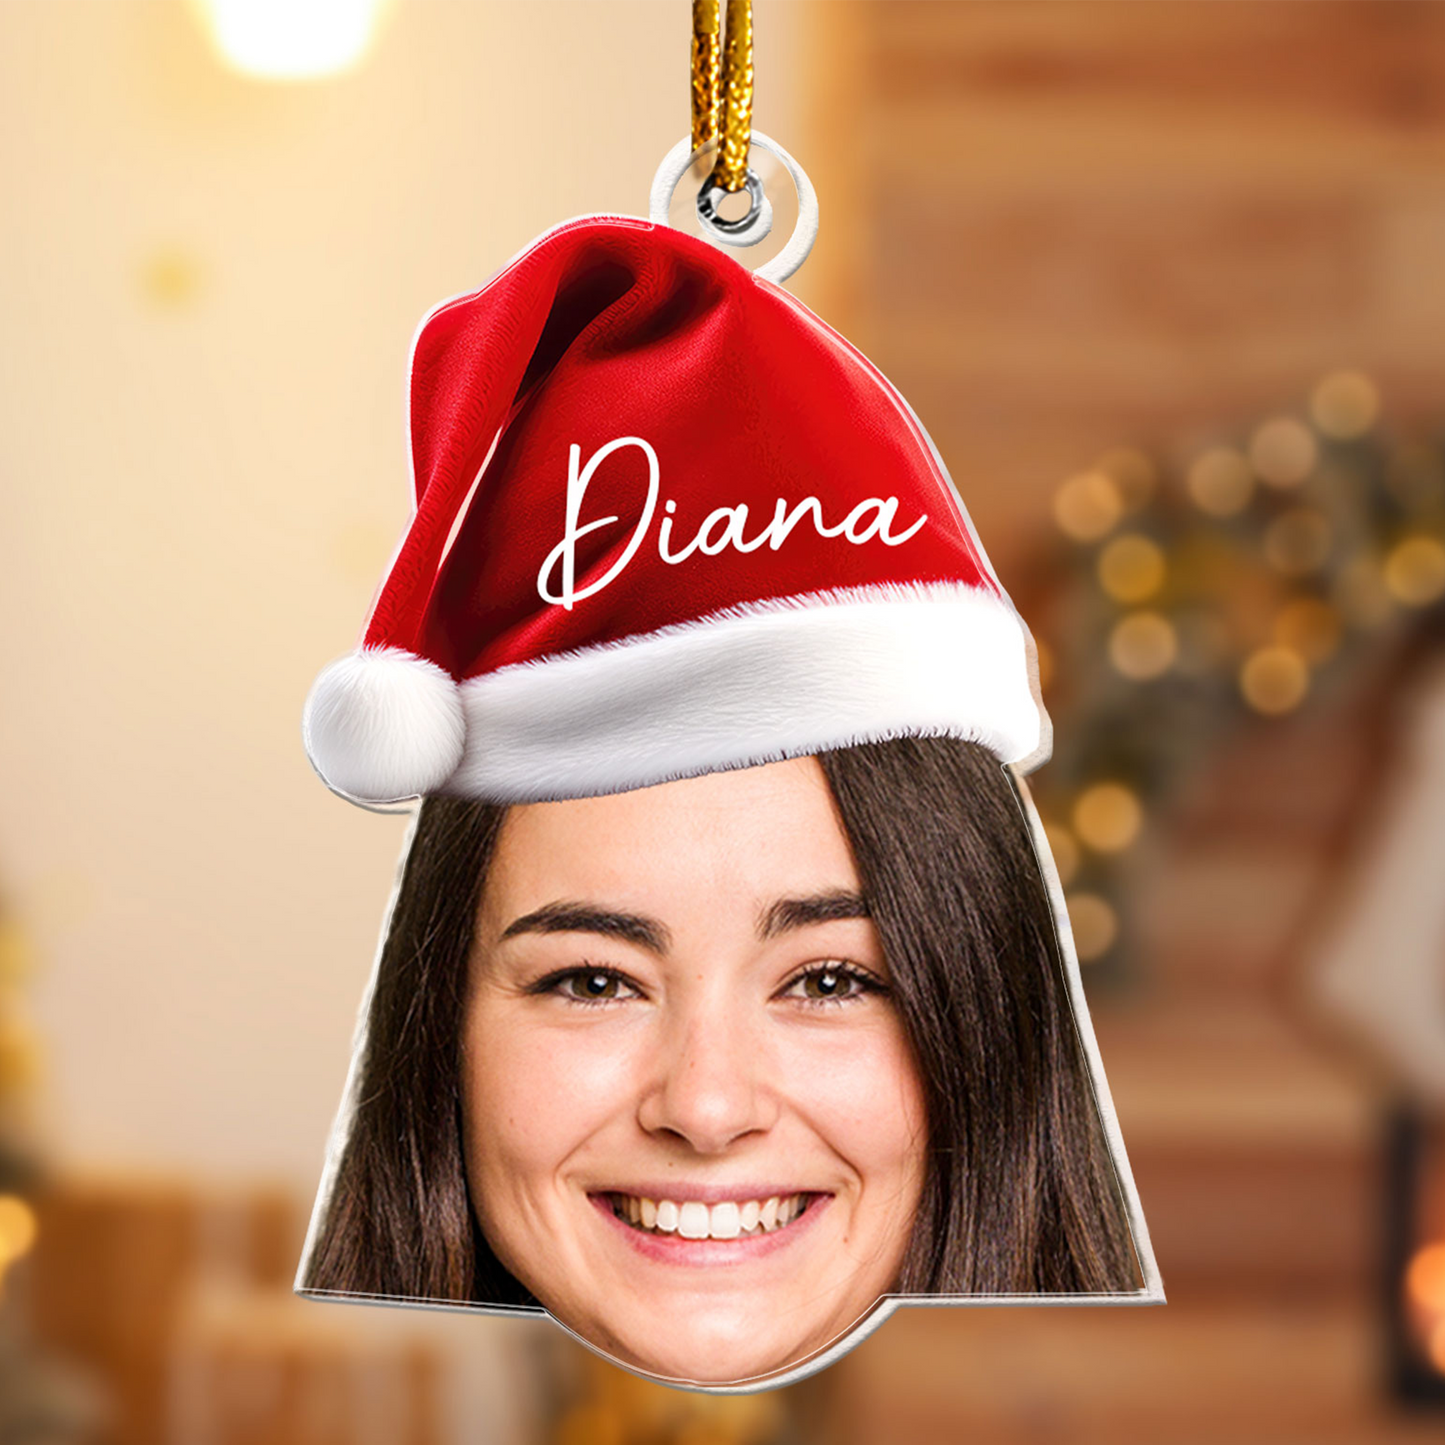 Funny Christmas Face - Personalized Acrylic Photo Ornament